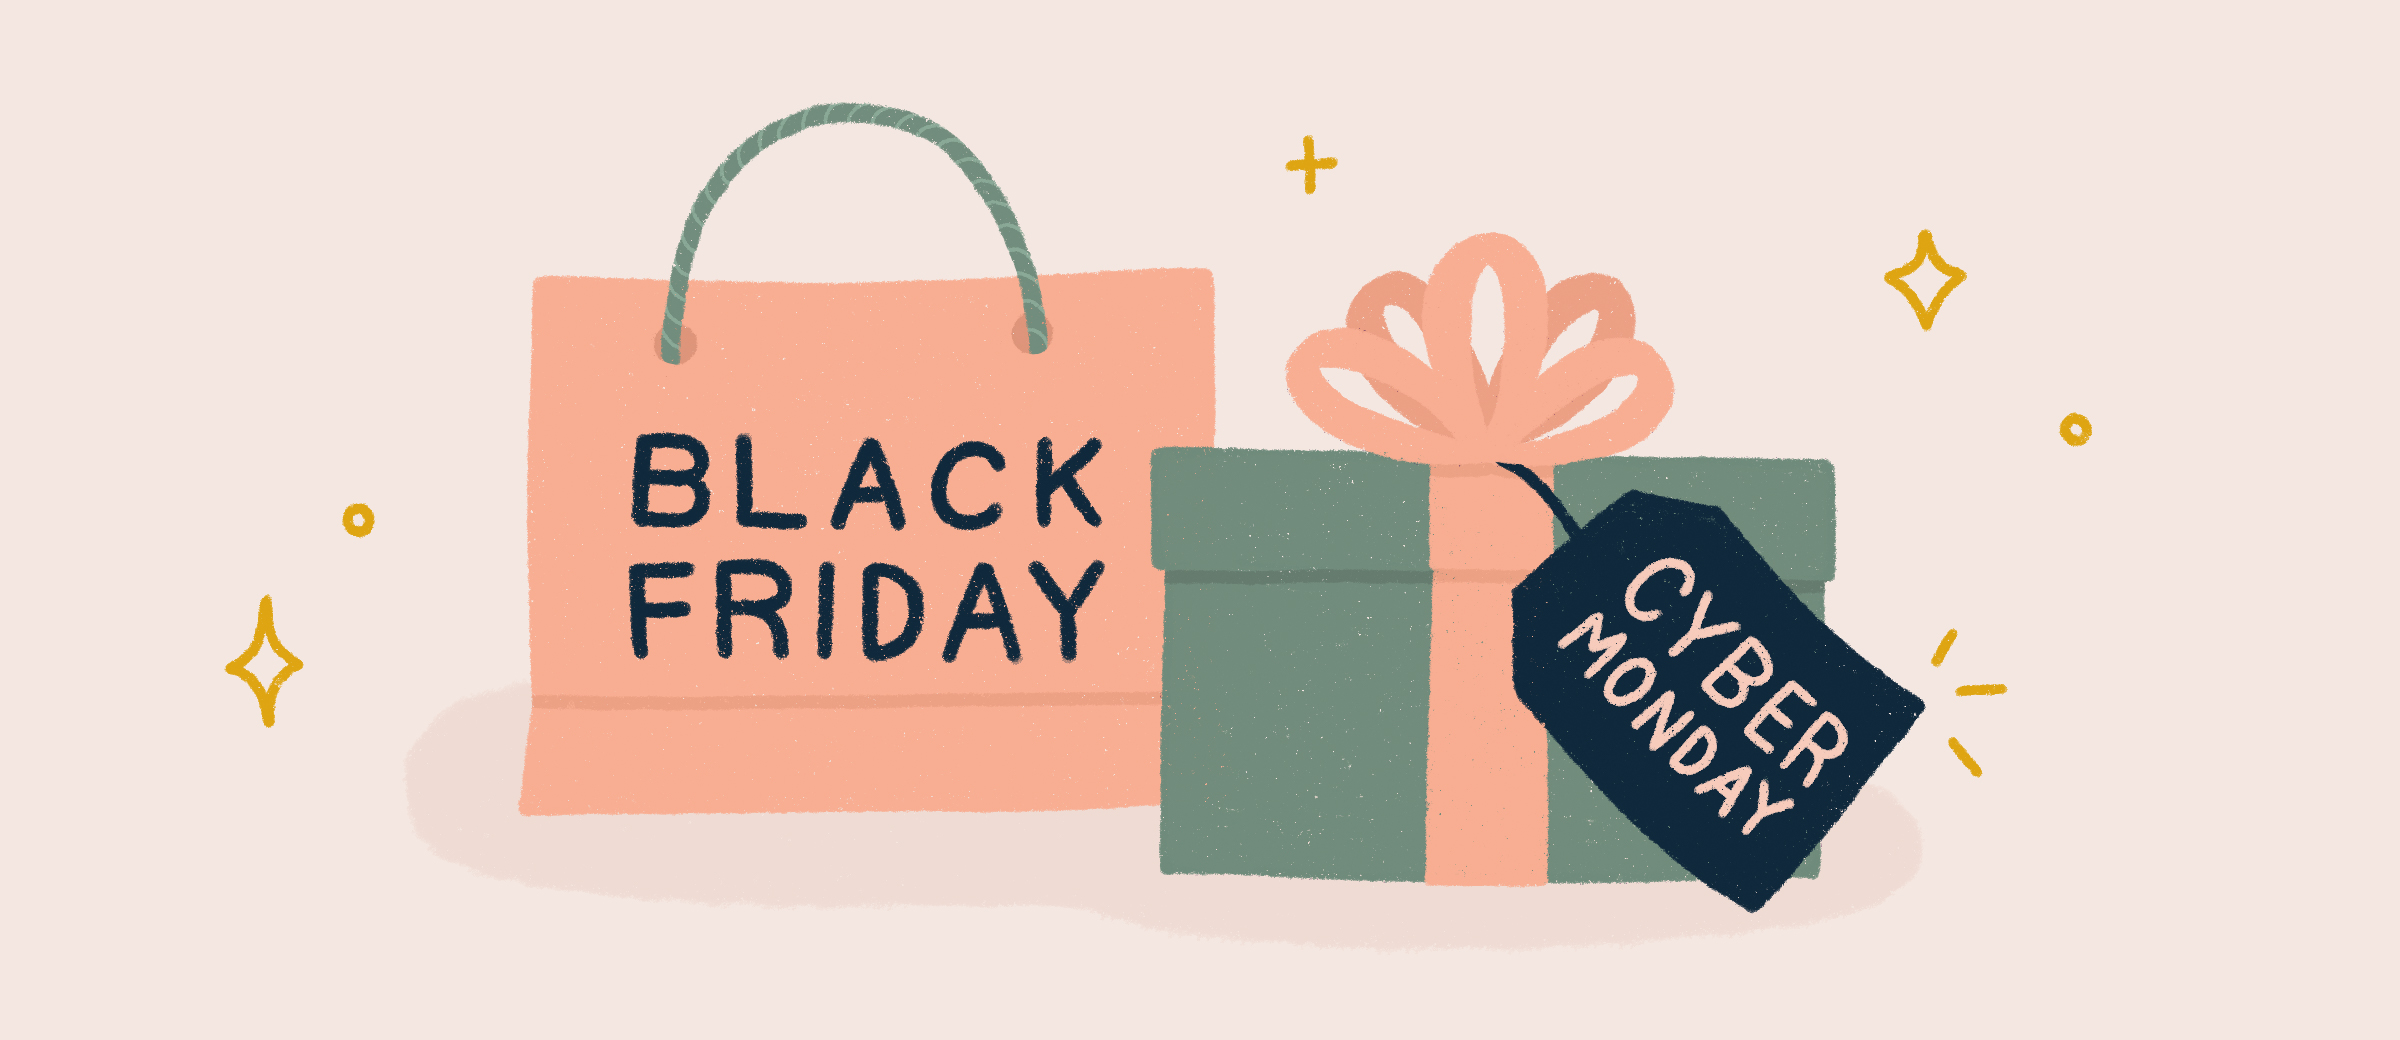 Black Friday and Cyber Monday Marketing and Content Ideas